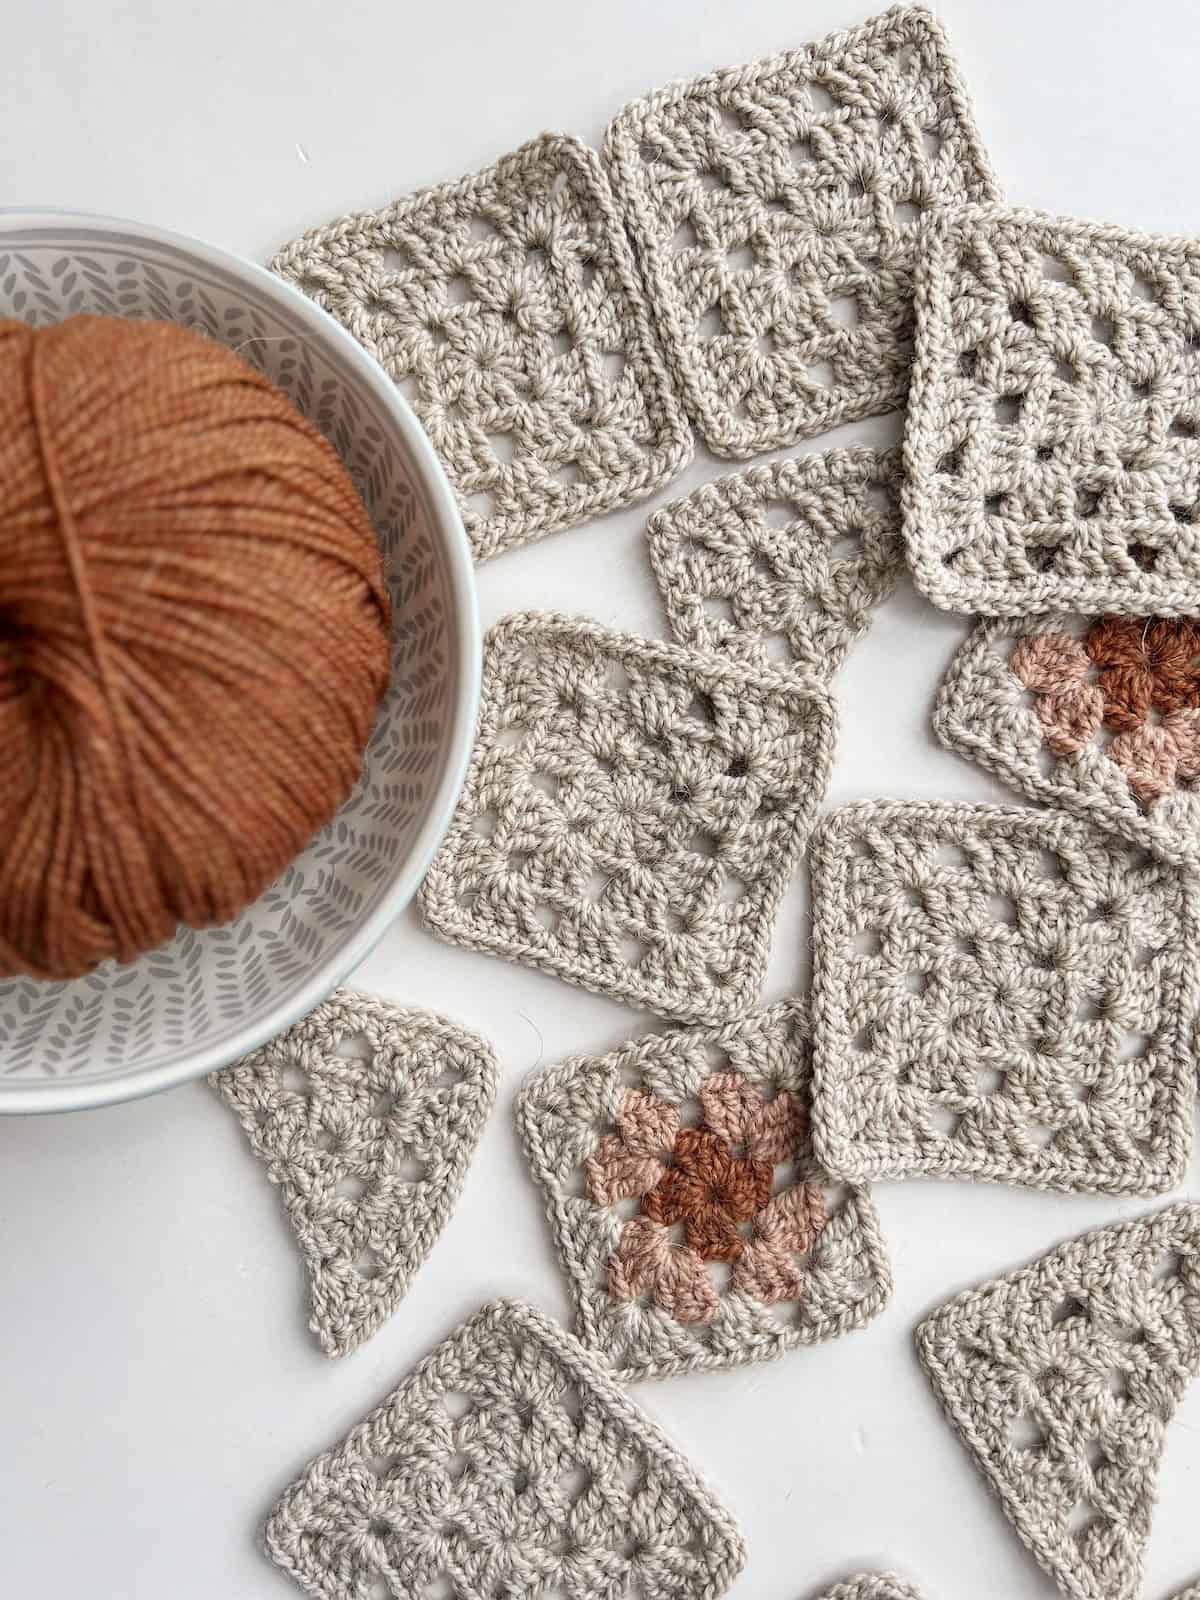 Crocheted squares with a ball of yarn next to them.